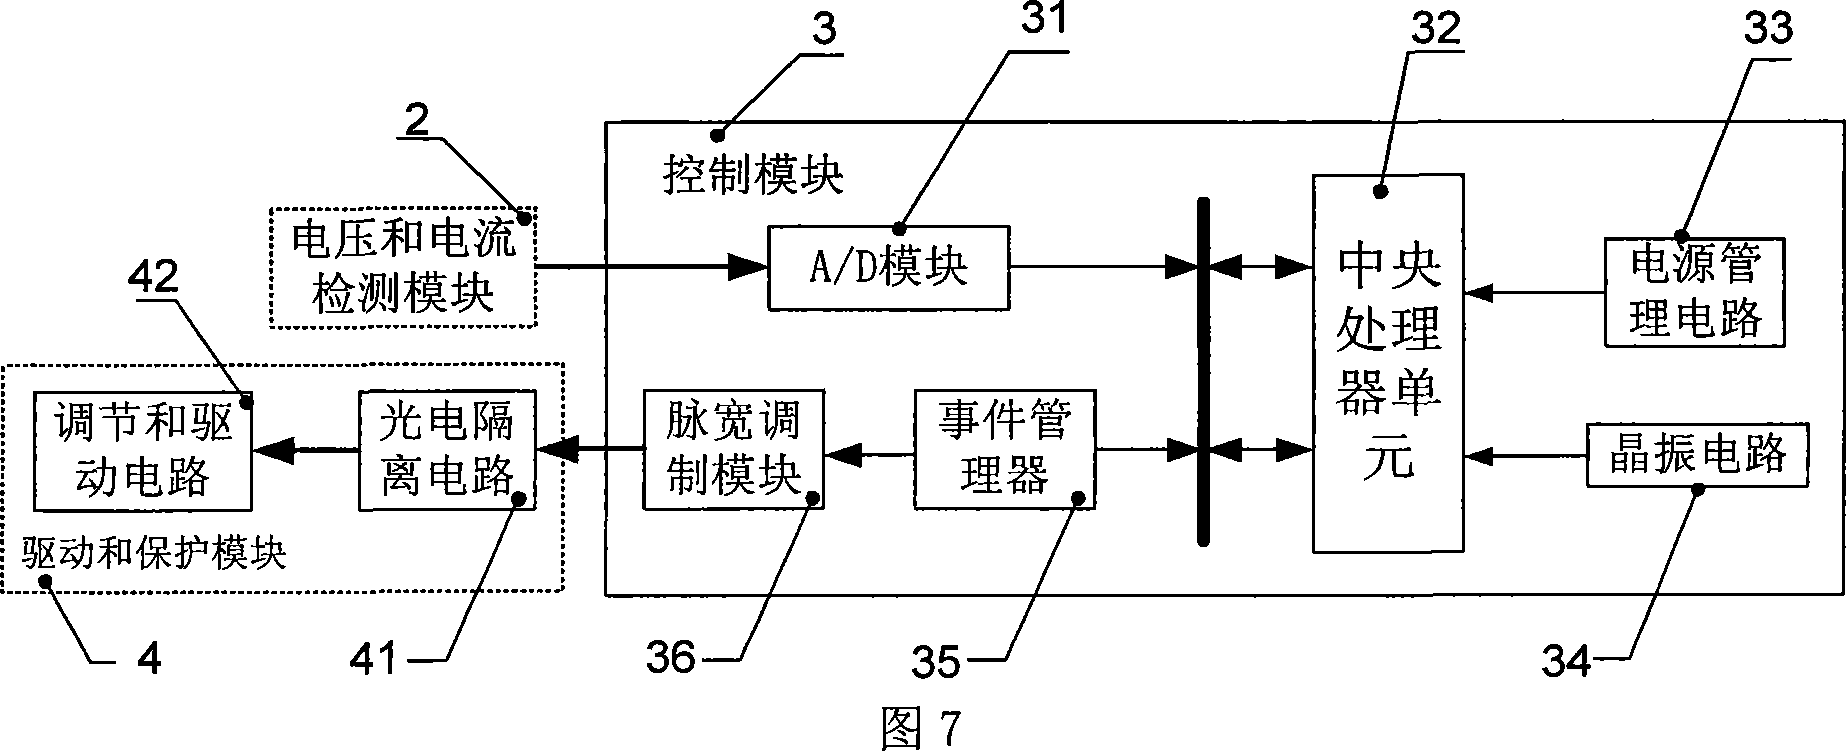 Photovoltaic power generation tracking controller based on digital signal processor